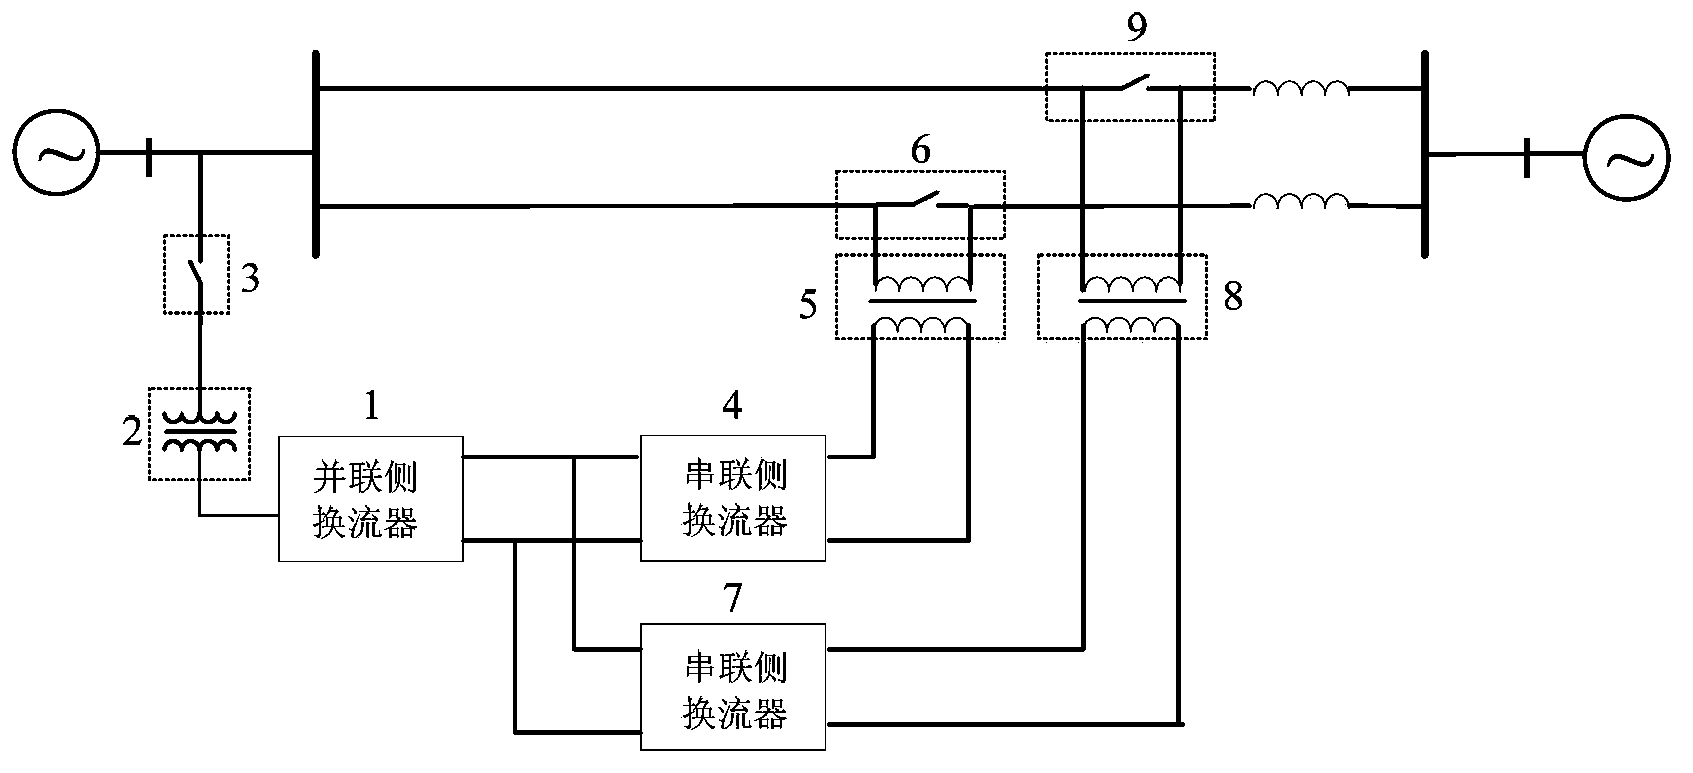 Unified power flow controller and control method thereof